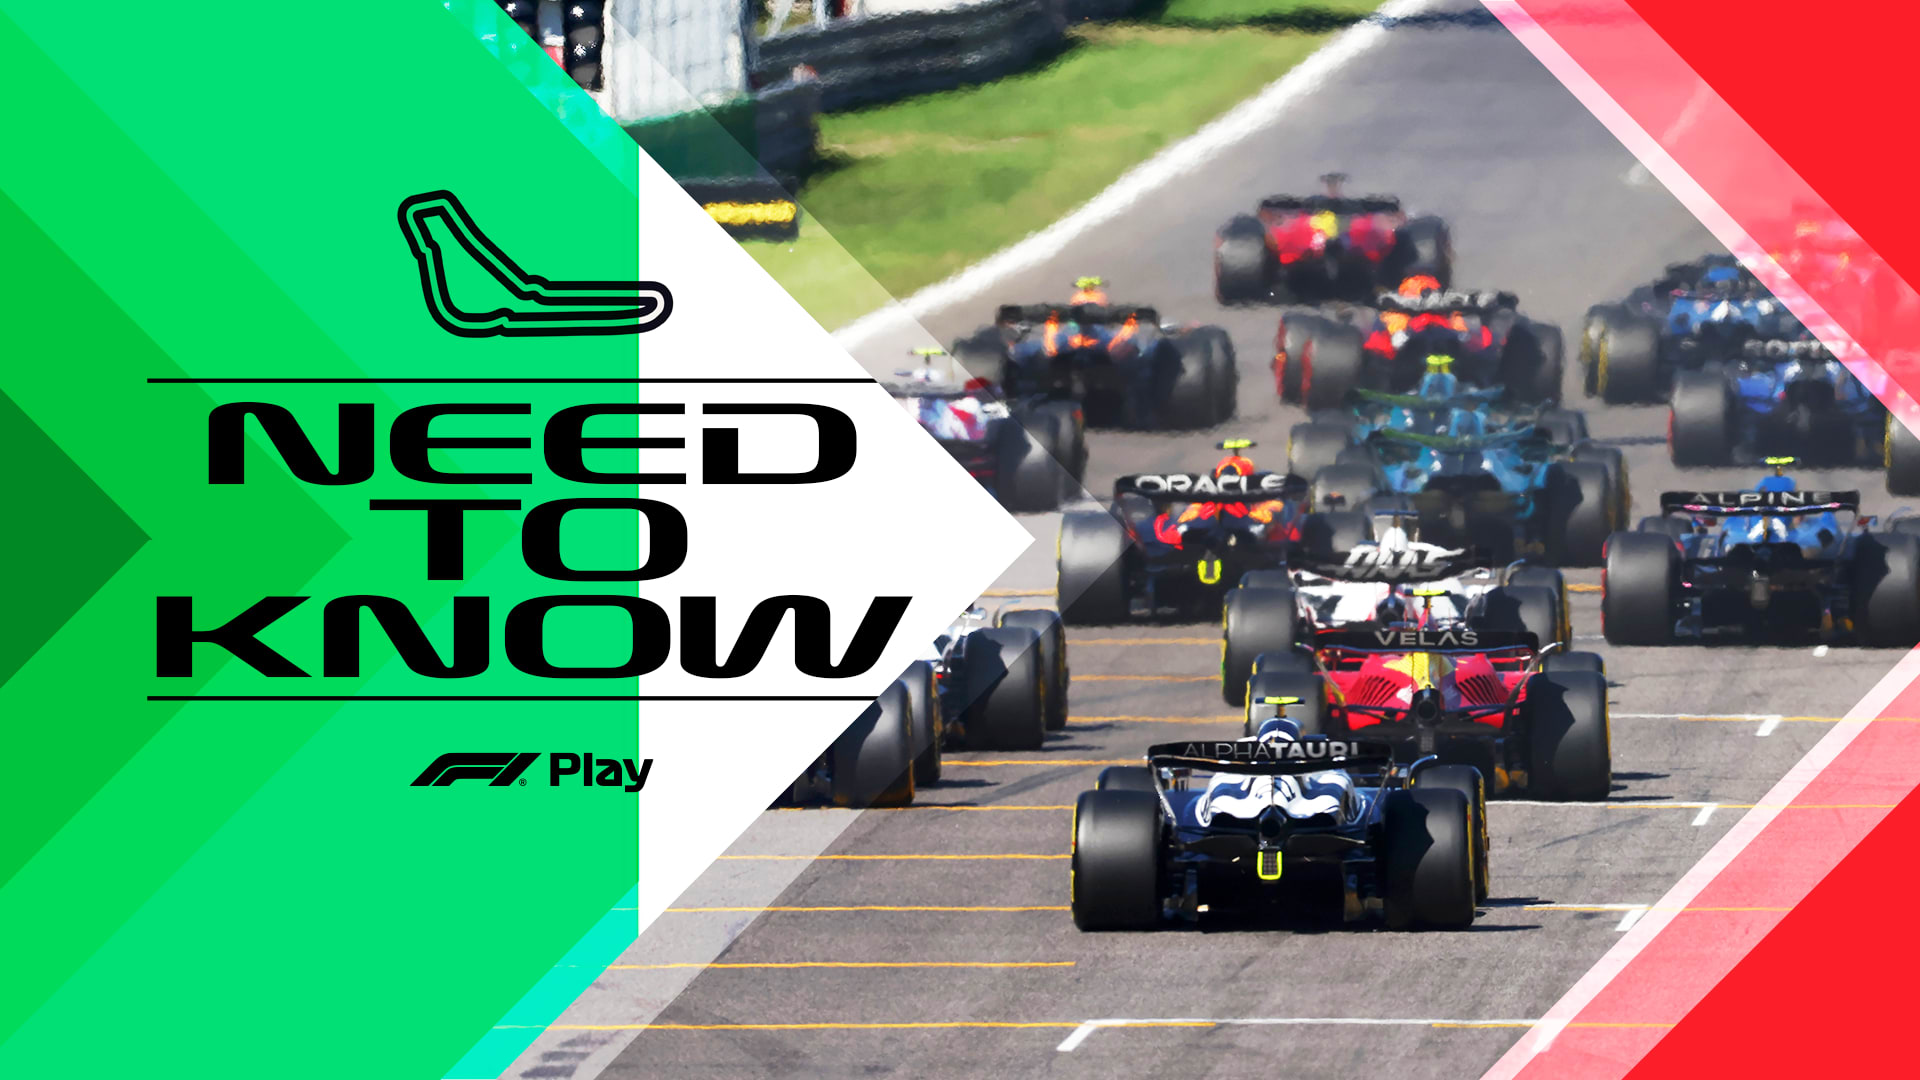 NEED TO KNOW The most important facts, stats and trivia ahead of the 2023 Italian Grand Prix Formula 1®